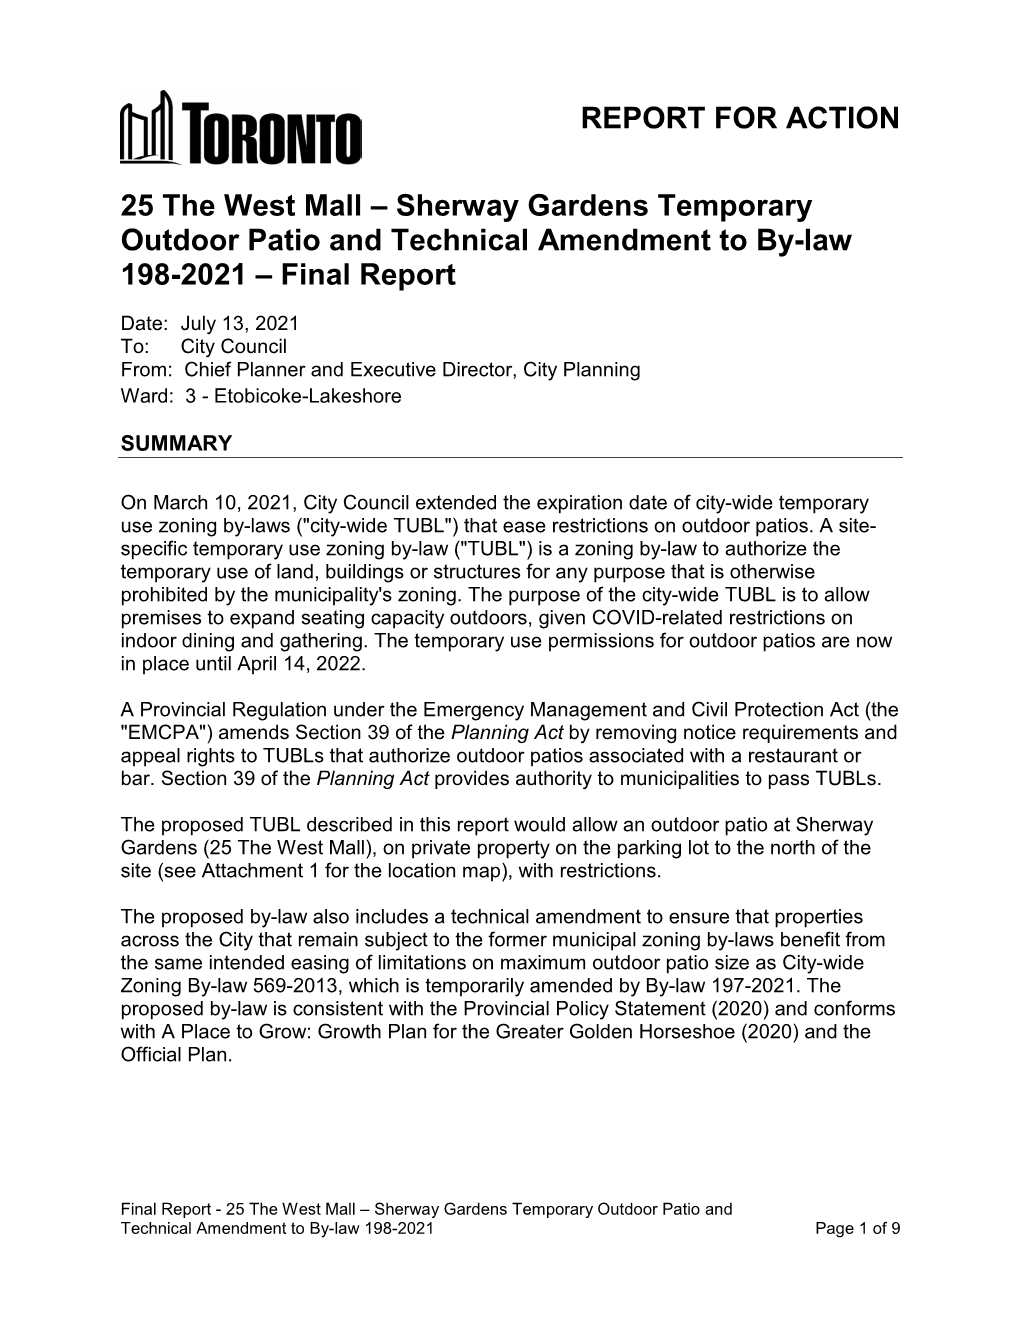 25 the West Mall – Sherway Gardens Temporary Outdoor Patio and Technical Amendment to By-Law 198-2021 – Final Report